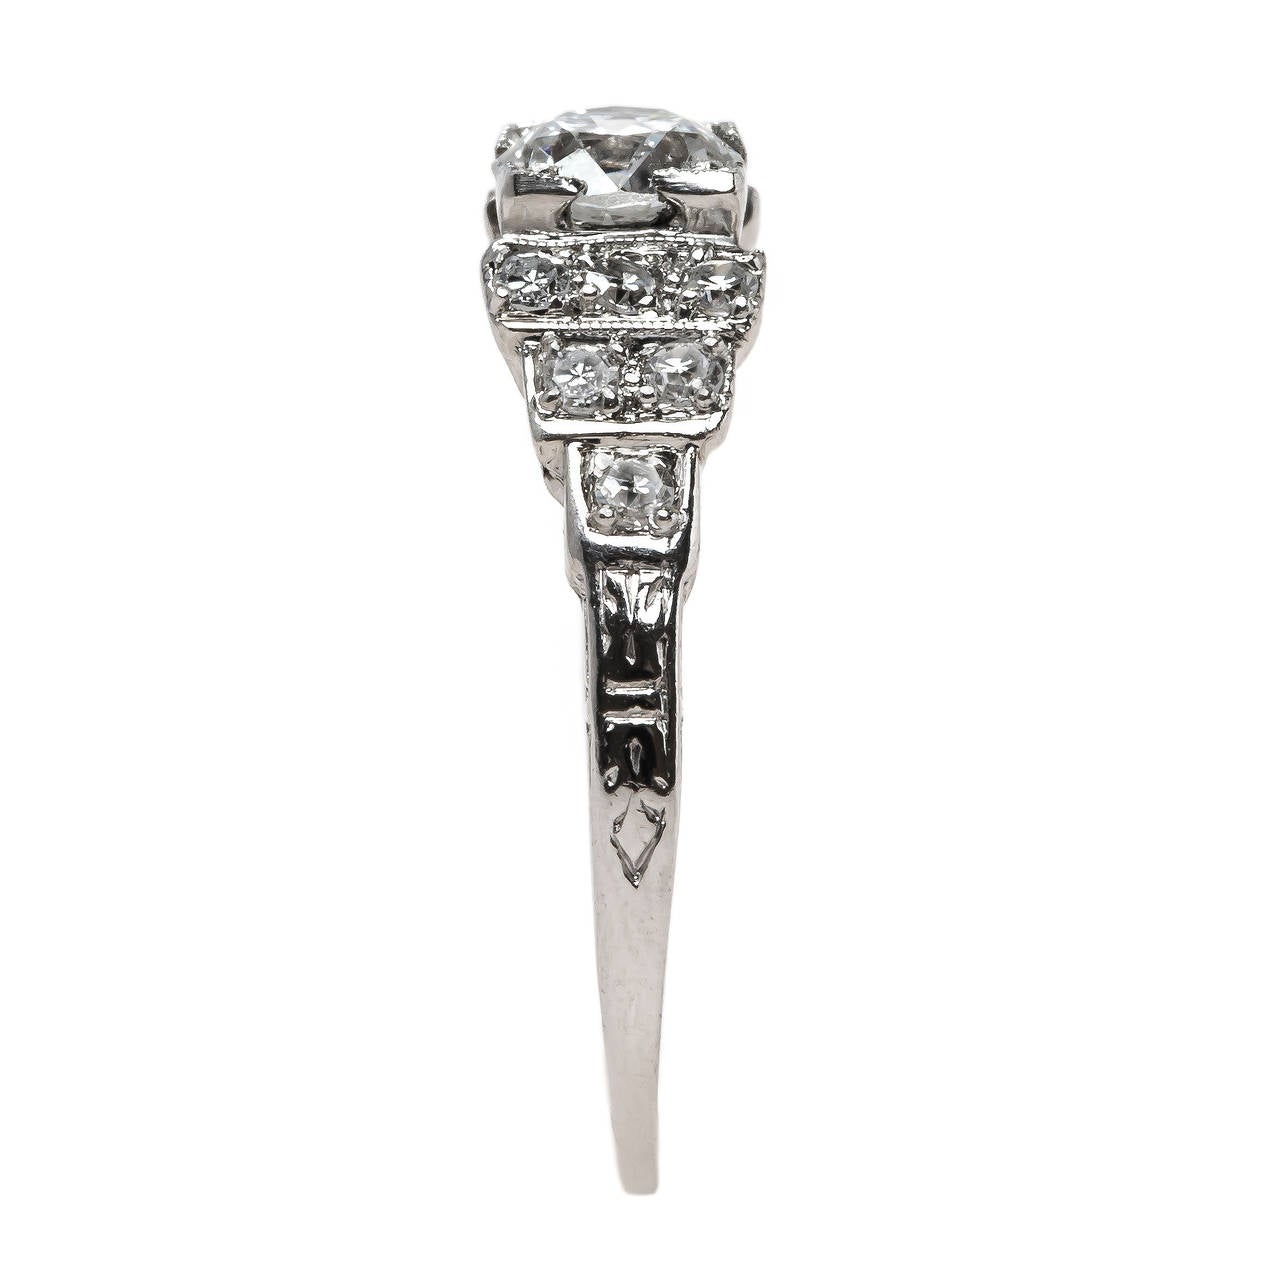 Carolwood is a classic Art Deco engagement ring (circa 1925) made from platinum centering a 0.54ct EGL certified Old European Cut diamond graded F color and VS2 clarity. The stunning center diamond is set in a crisp box setting and finished with